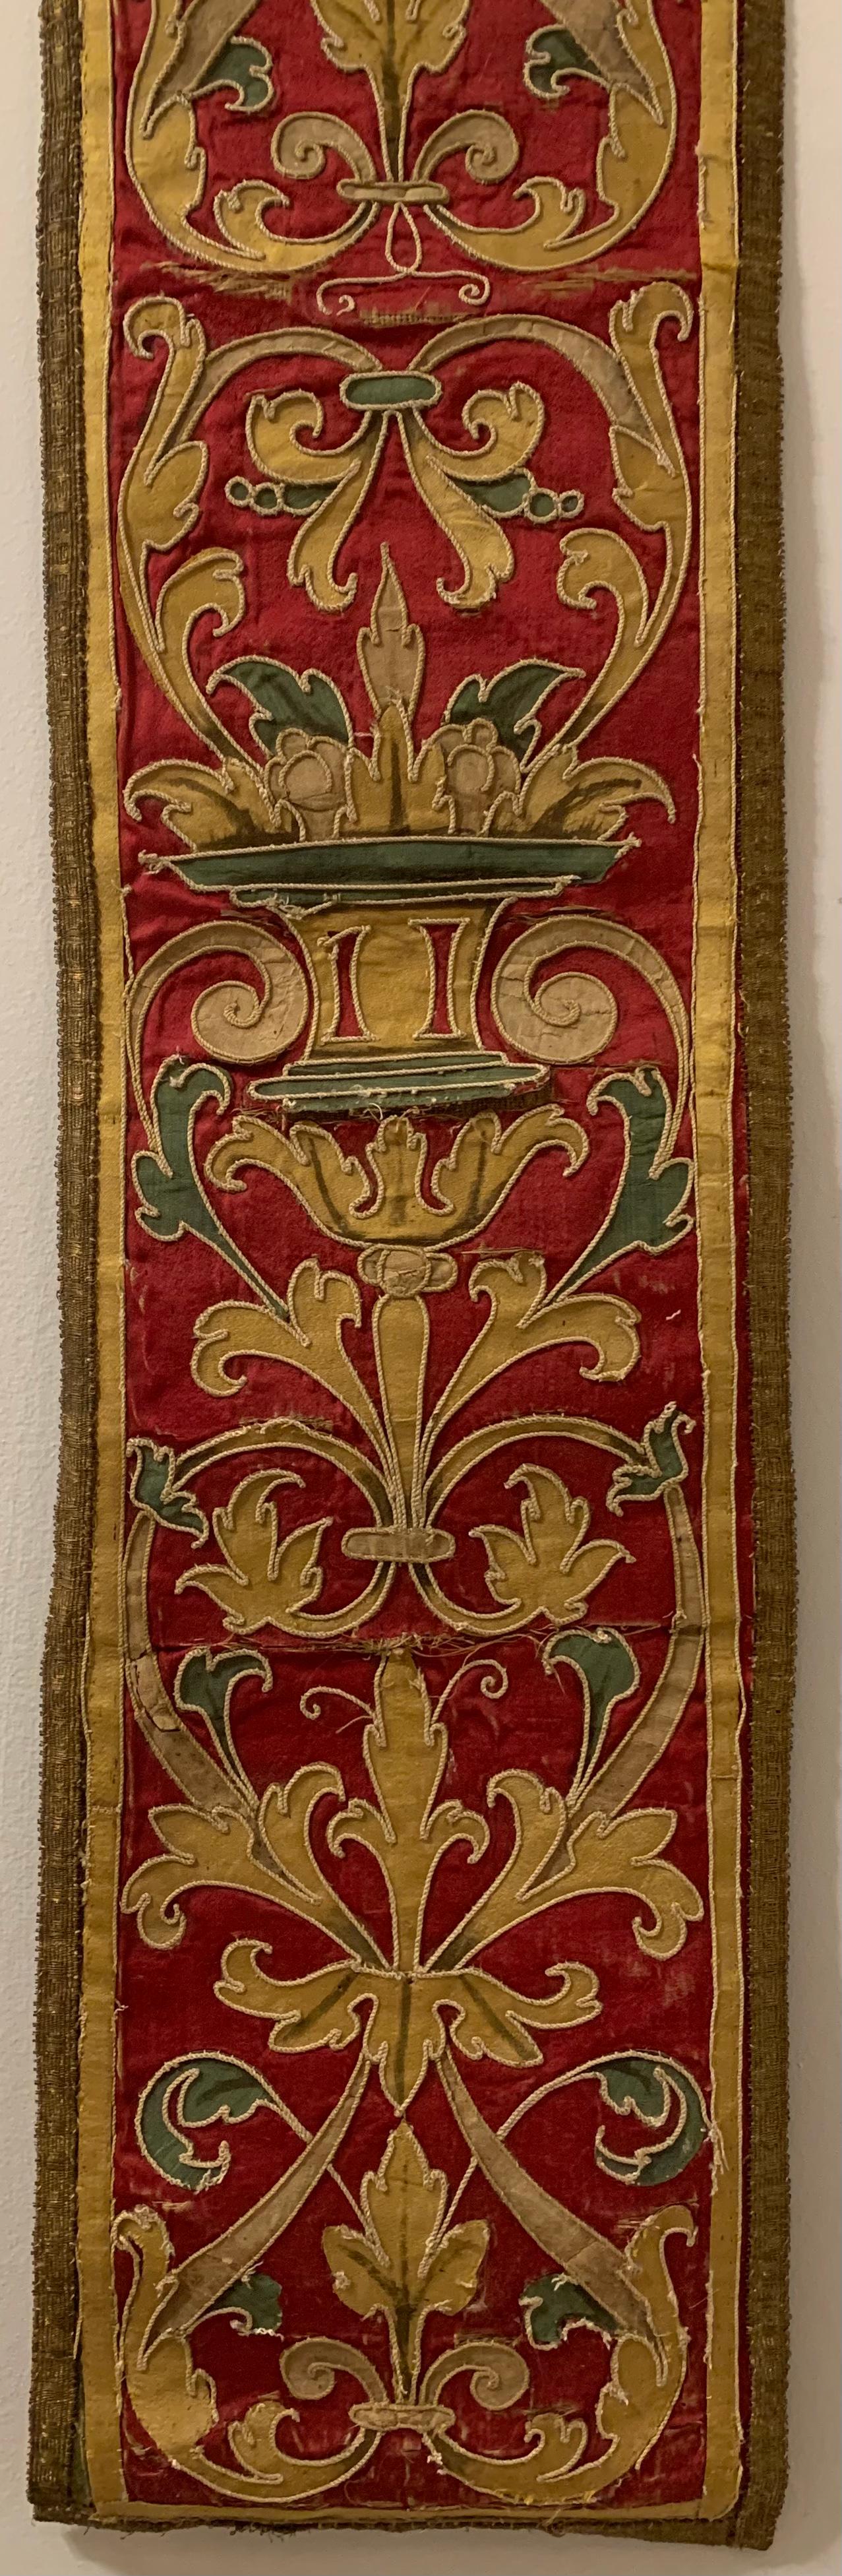 Antique 17th Century Baroque Italian Silk, Metallic Thread Embroidery Panel In Good Condition For Sale In New York, NY